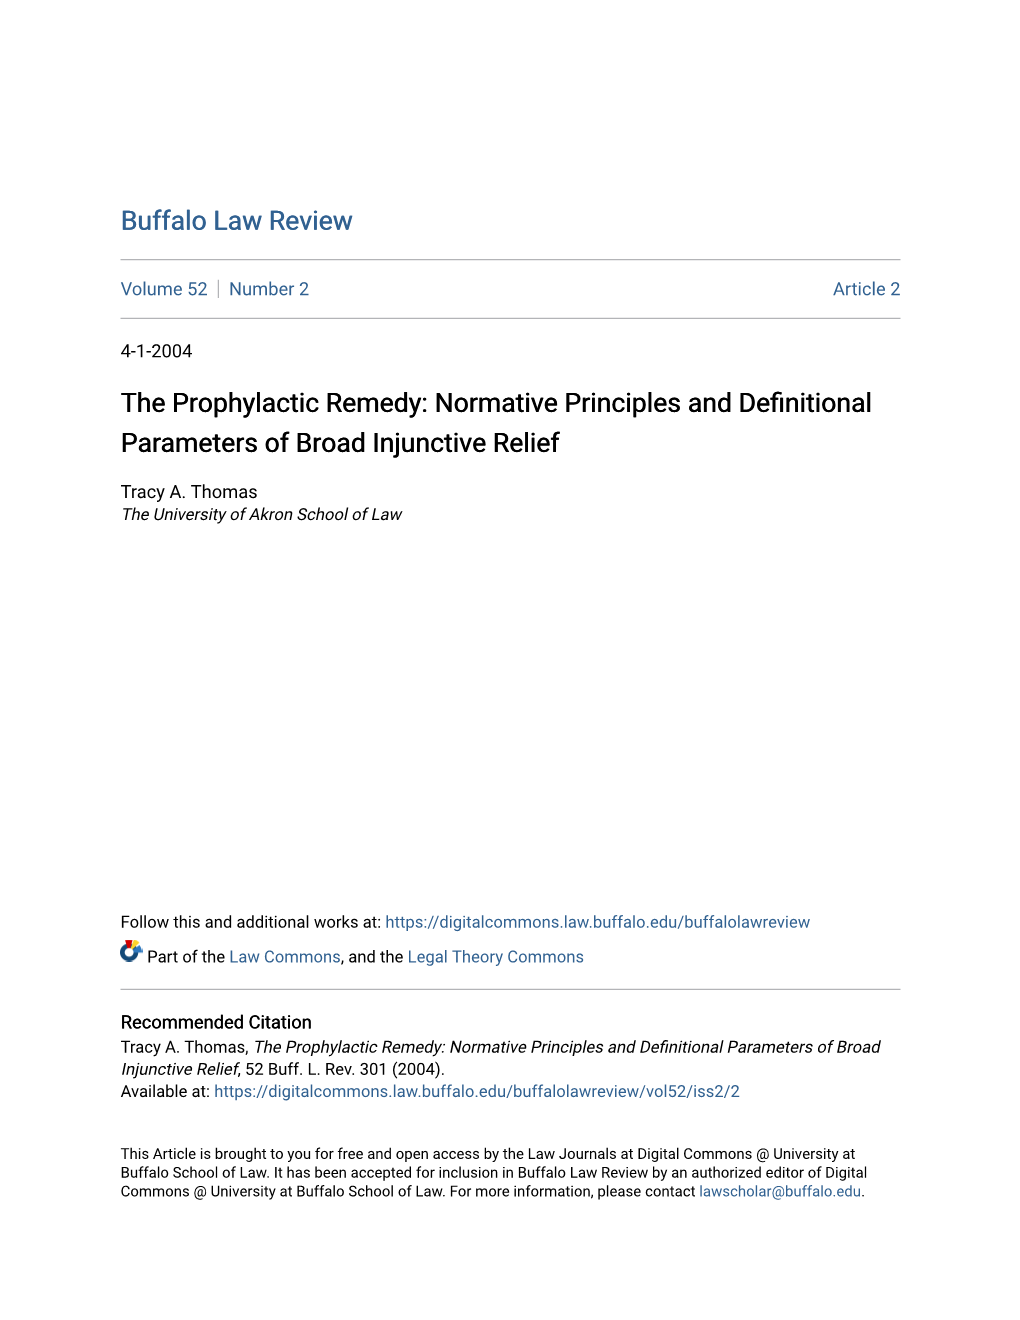 The Prophylactic Remedy: Normative Principles and Definitional Parameters of Broad Injunctive Relief